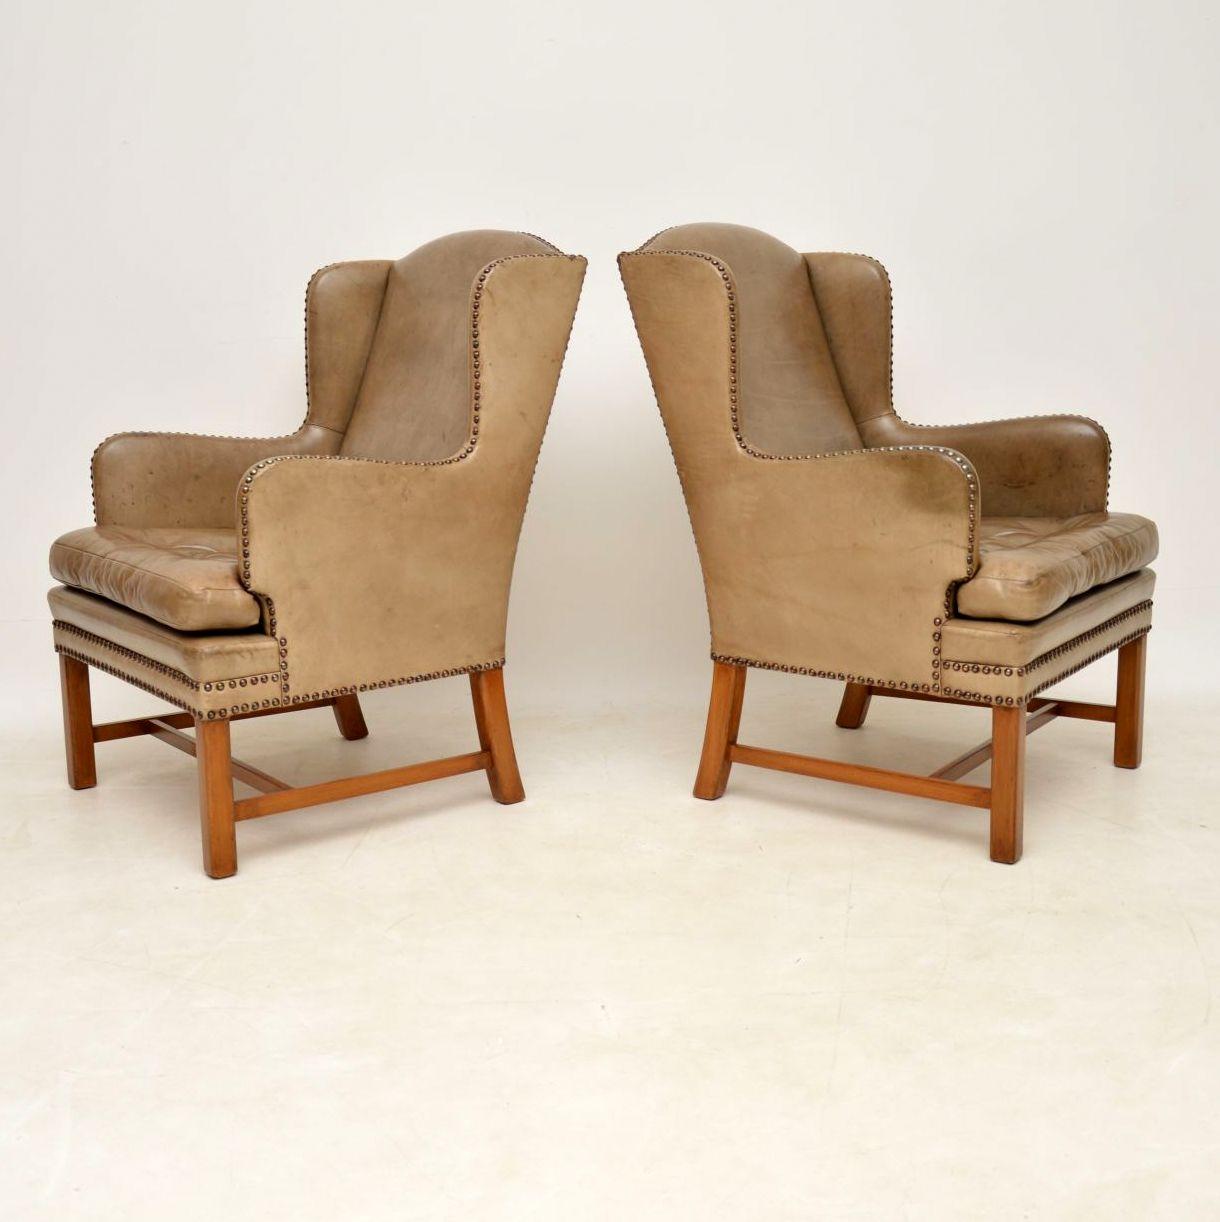 Edwardian Pair of Antique Swedish Leather Wingback Armchairs